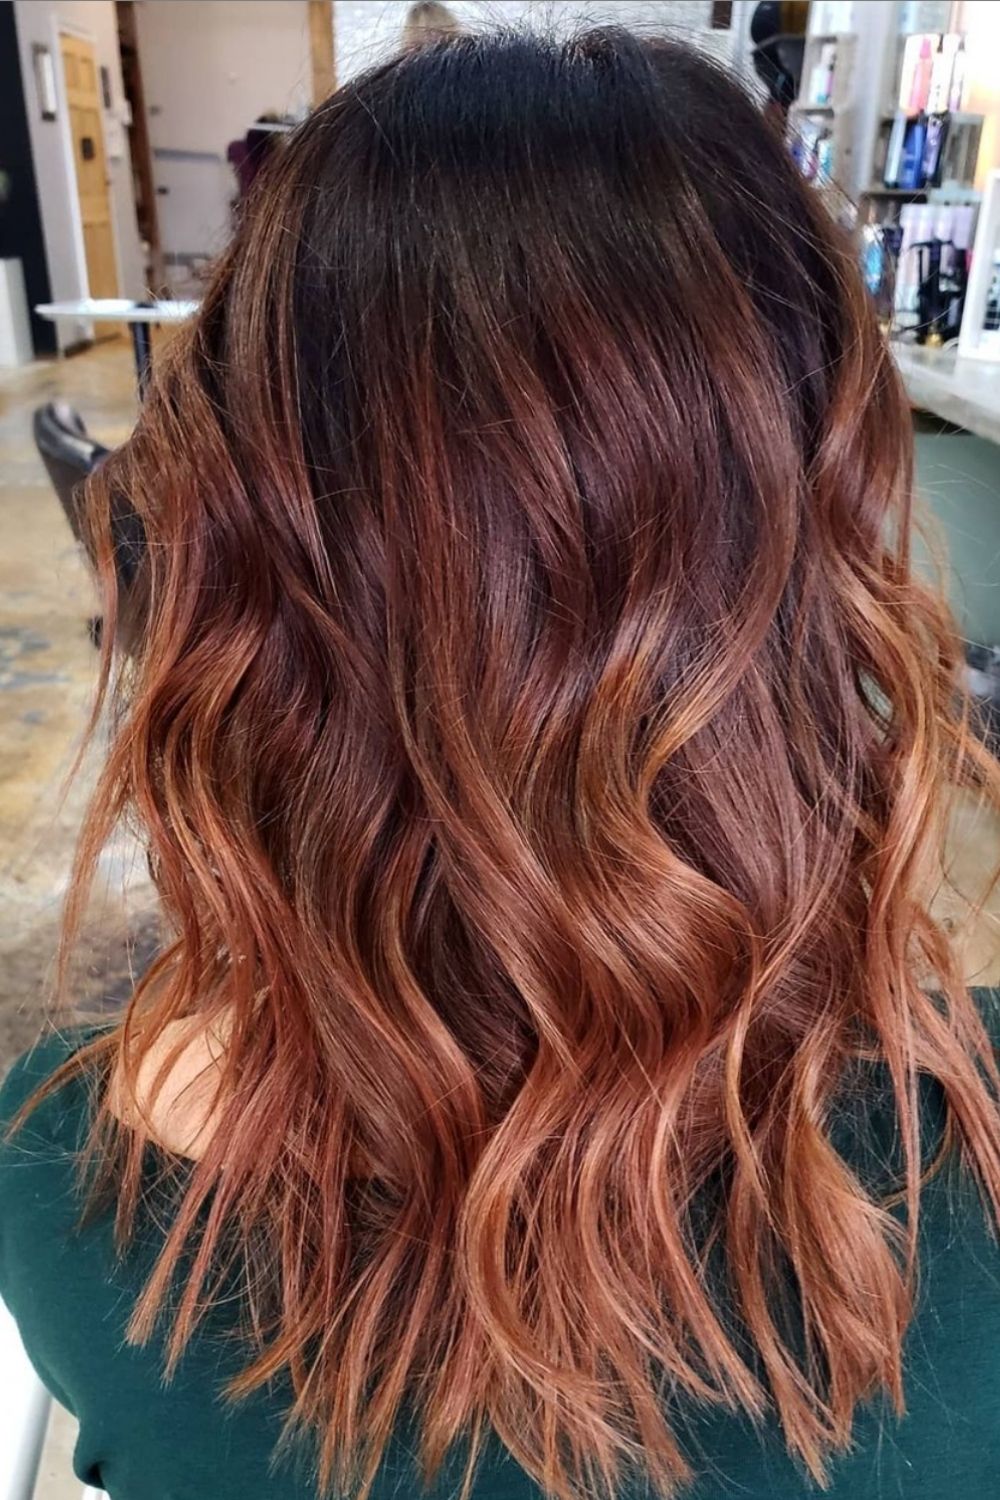 44 Best Fall hair colors and hair dye ideas for  2021!